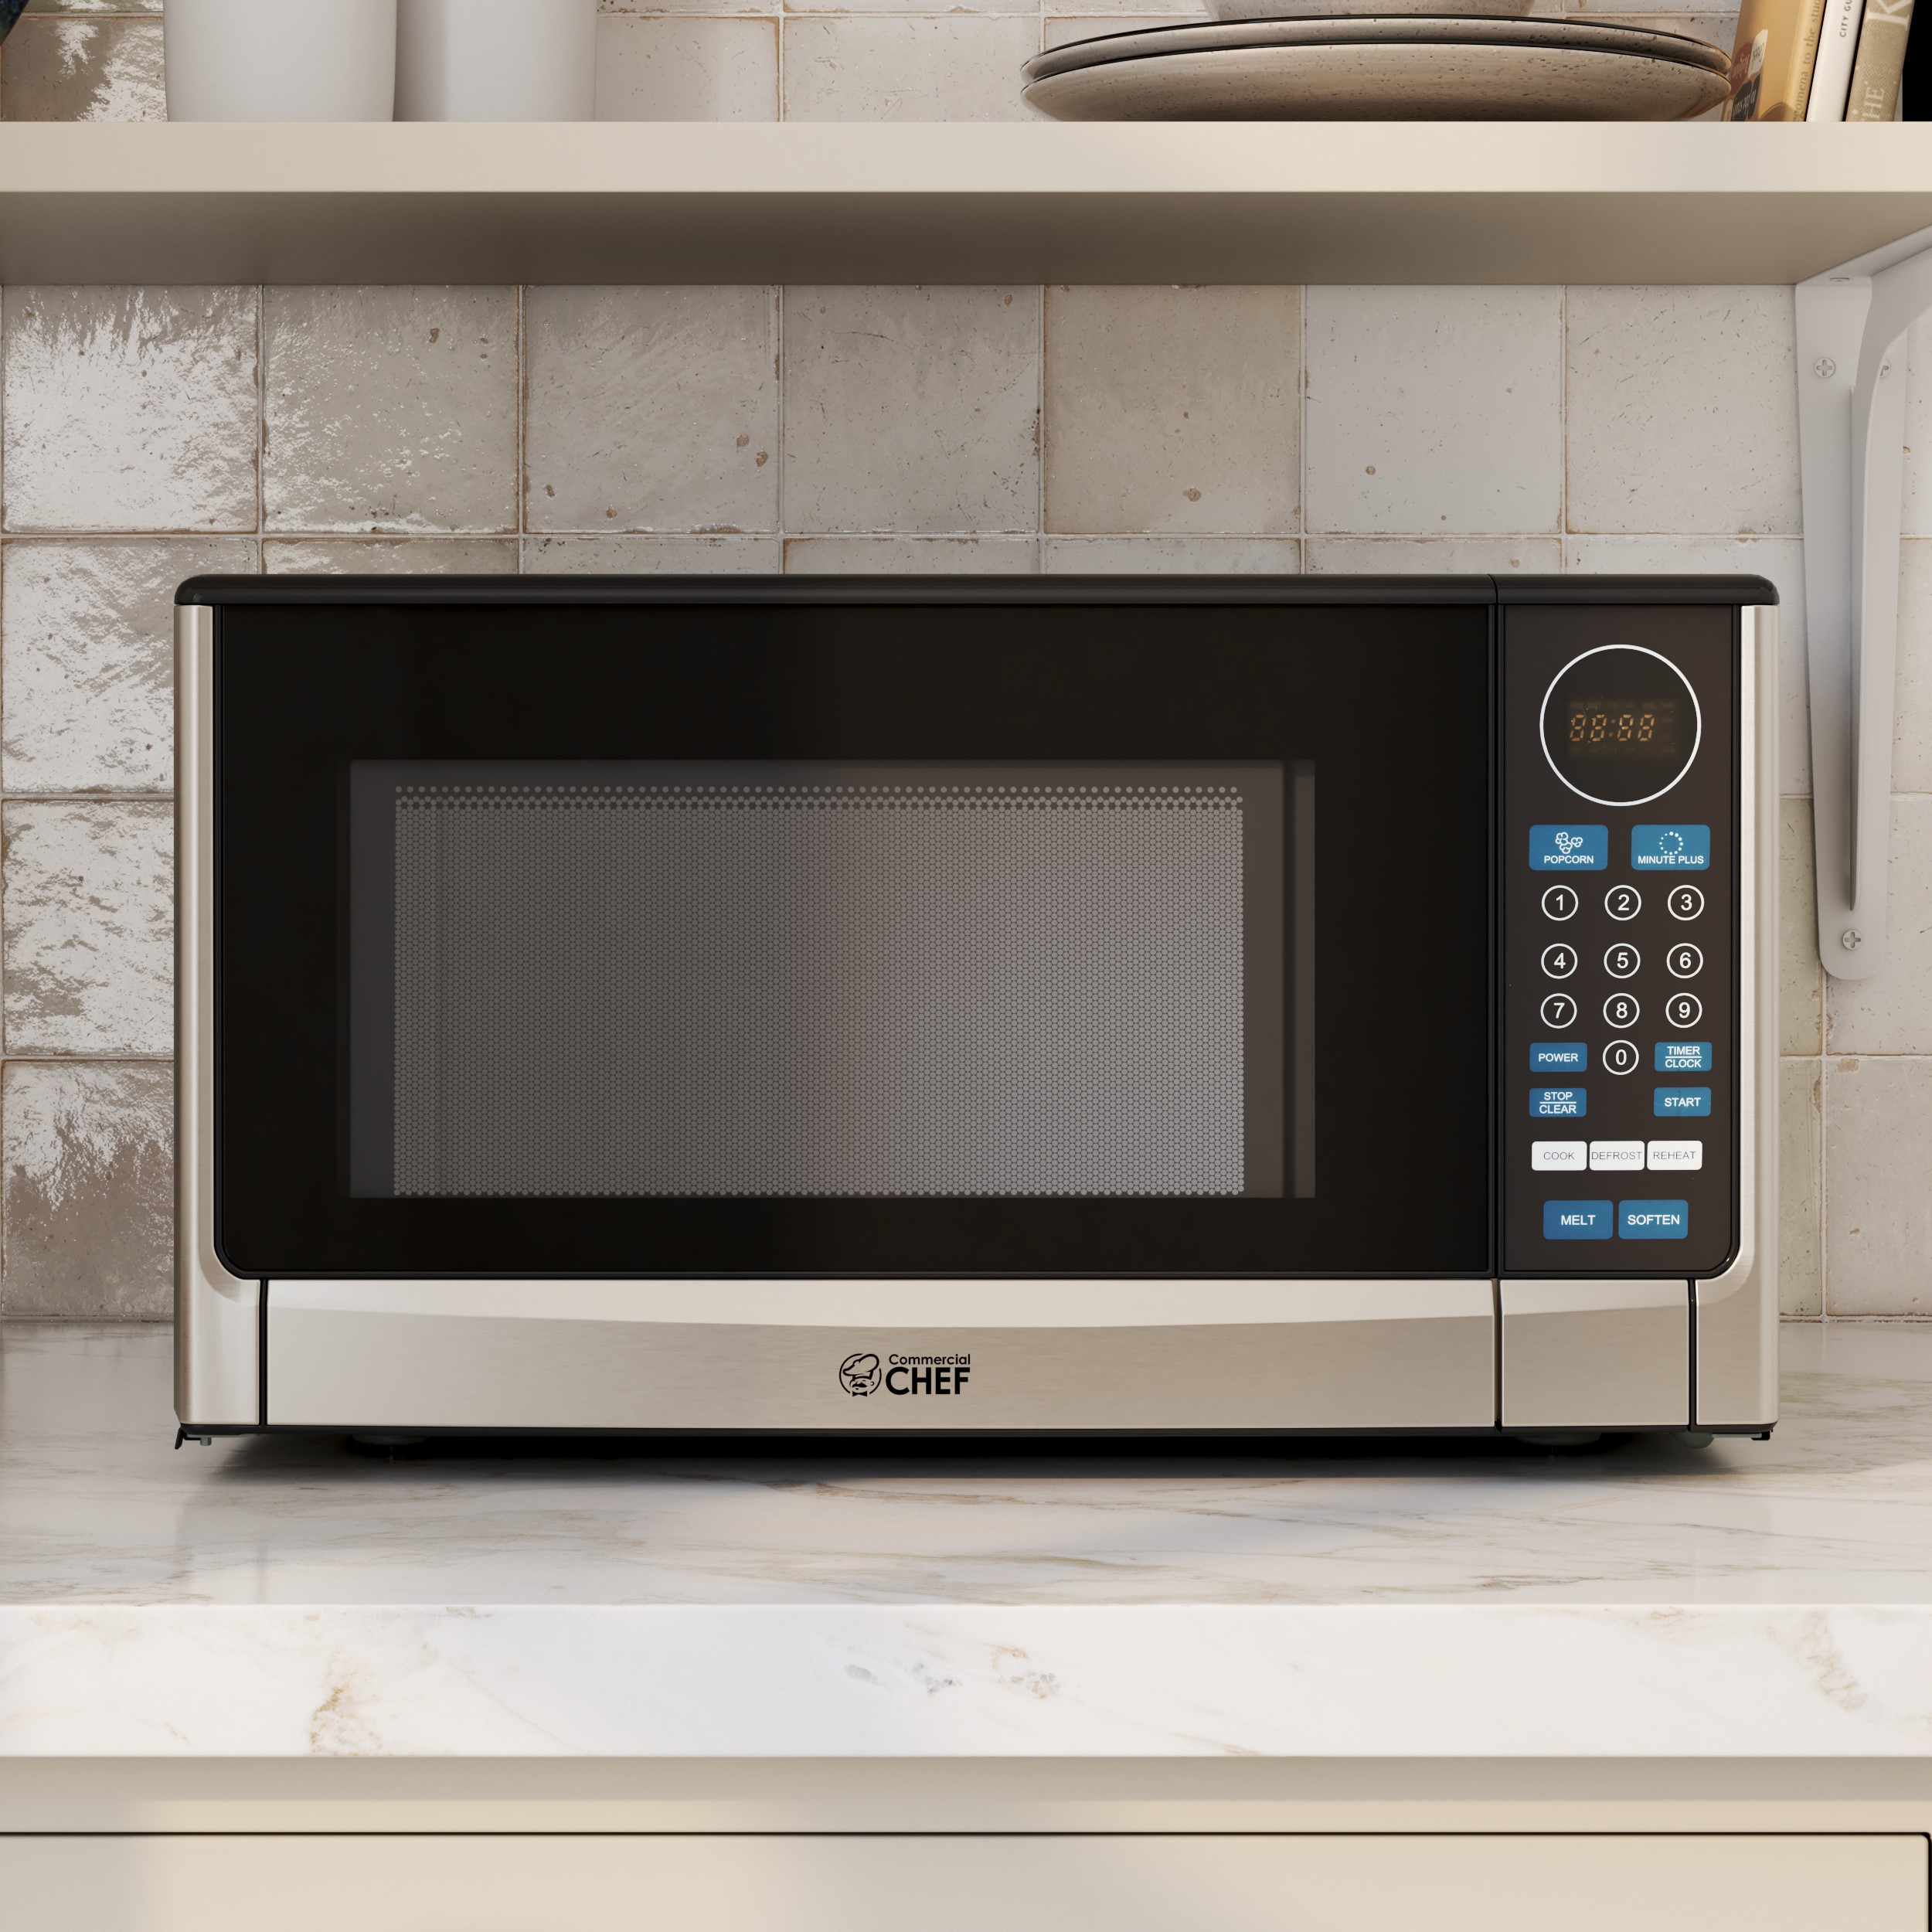 Commercial Chef CHM770SS Countertop Microwave Oven, 0.7 Cubic Feet, Stainless Steel